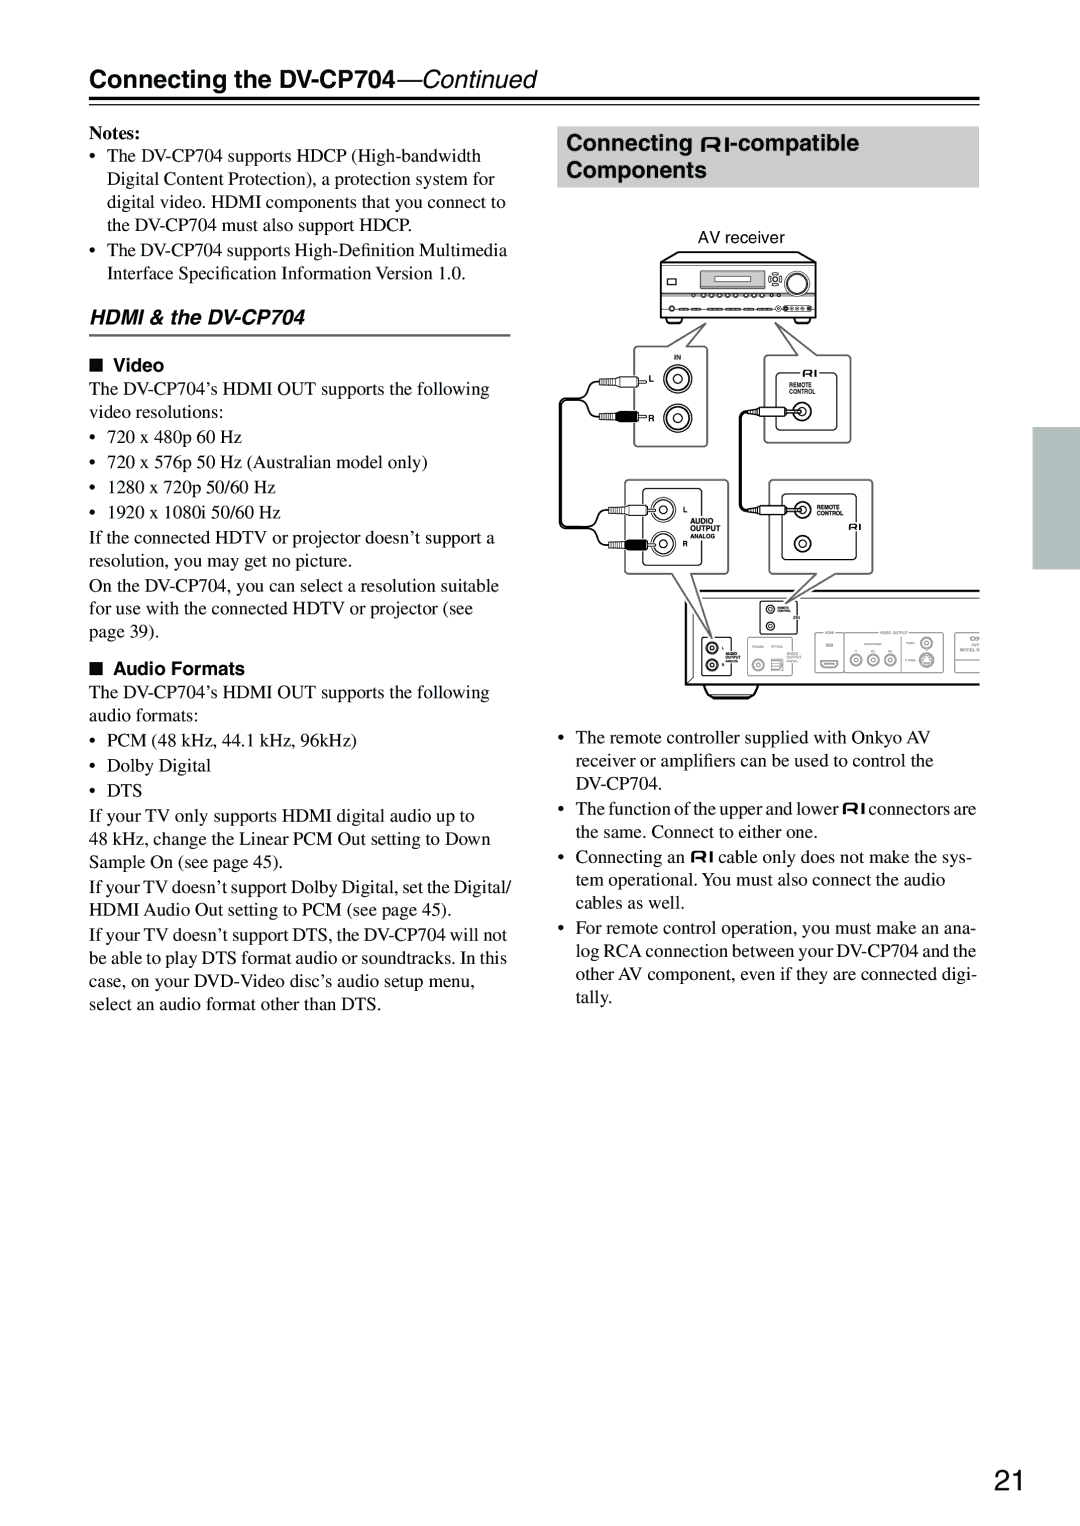 Onkyo DV-CP704S instruction manual Connecting -compatible Components, Hdmi & the DV-CP704, Video, Audio Formats 